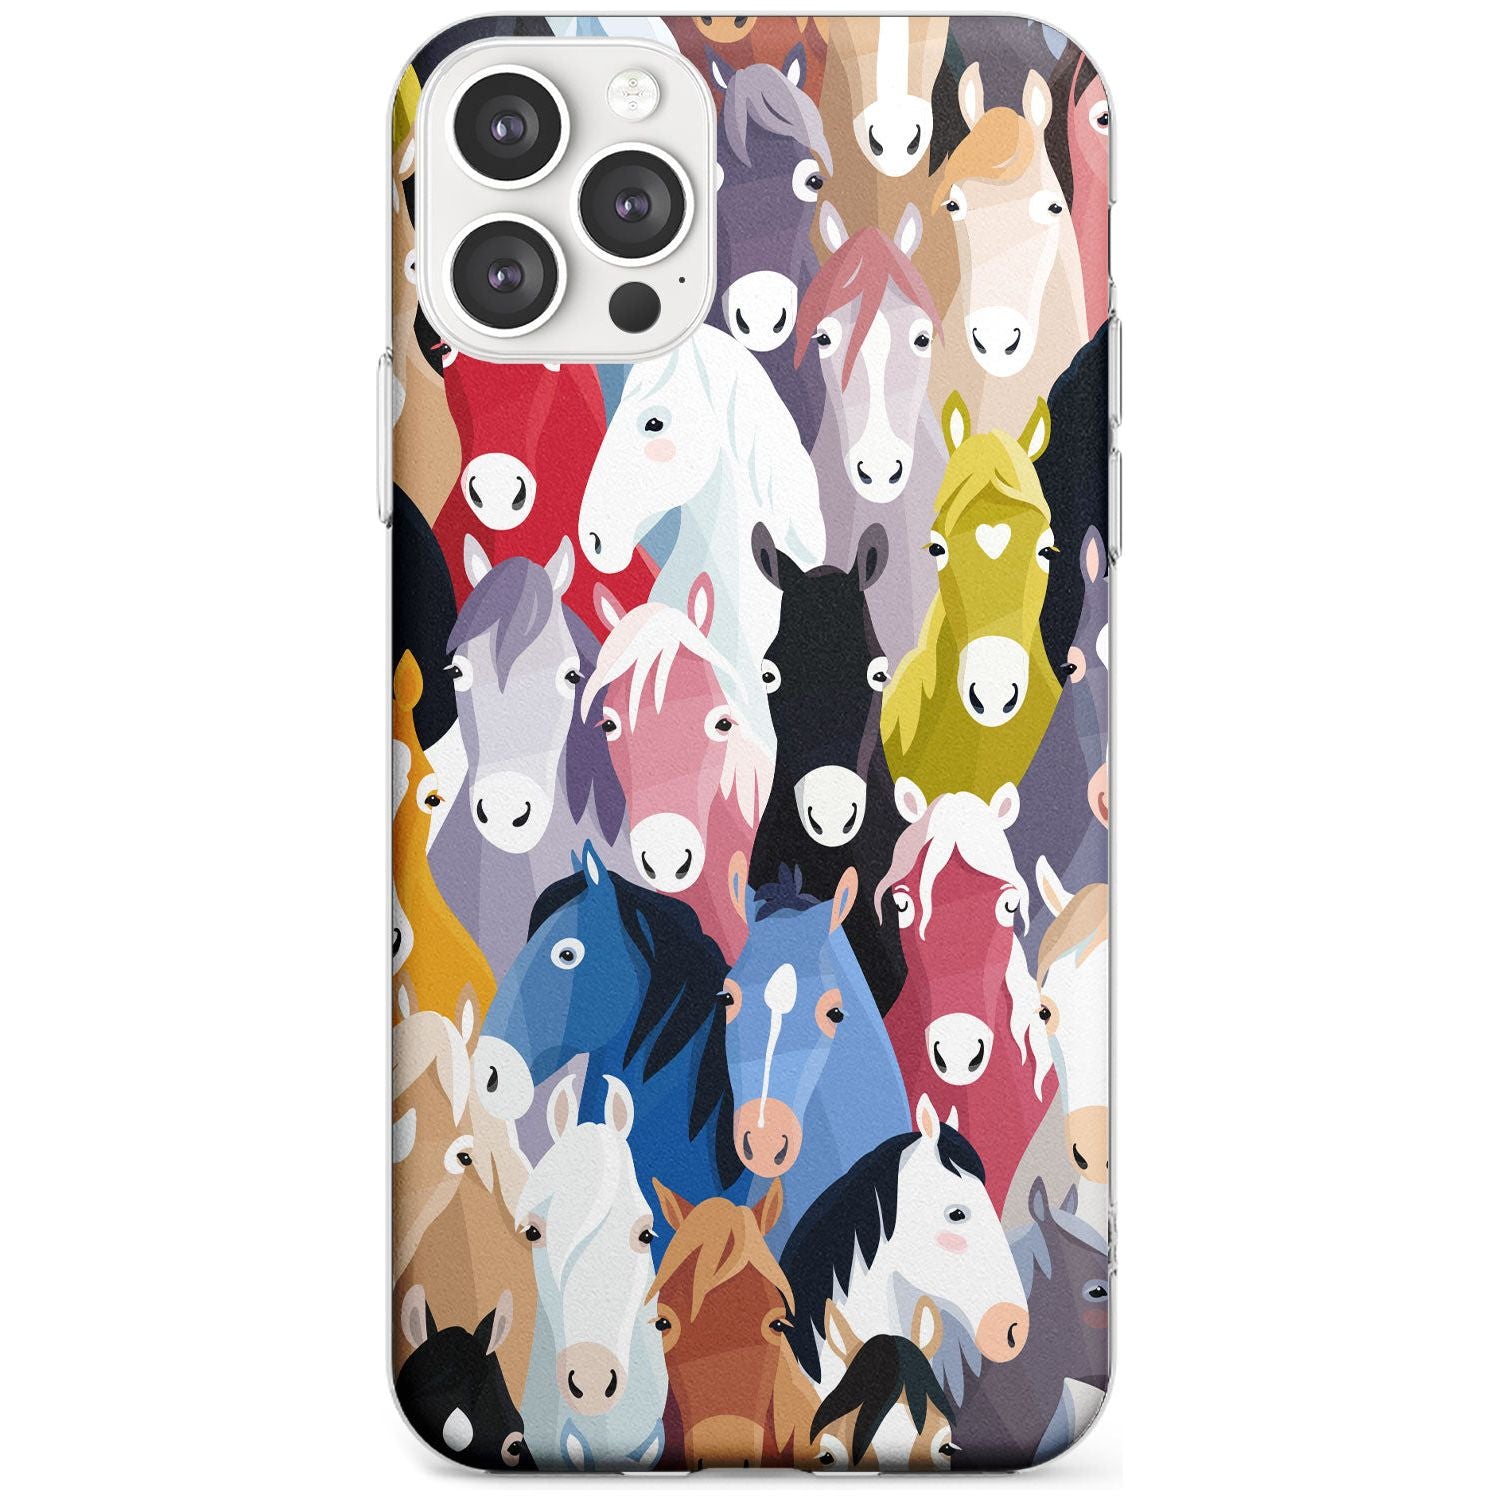 Colourful Horse Pattern Slim TPU Phone Case for iPhone 11 Pro Max